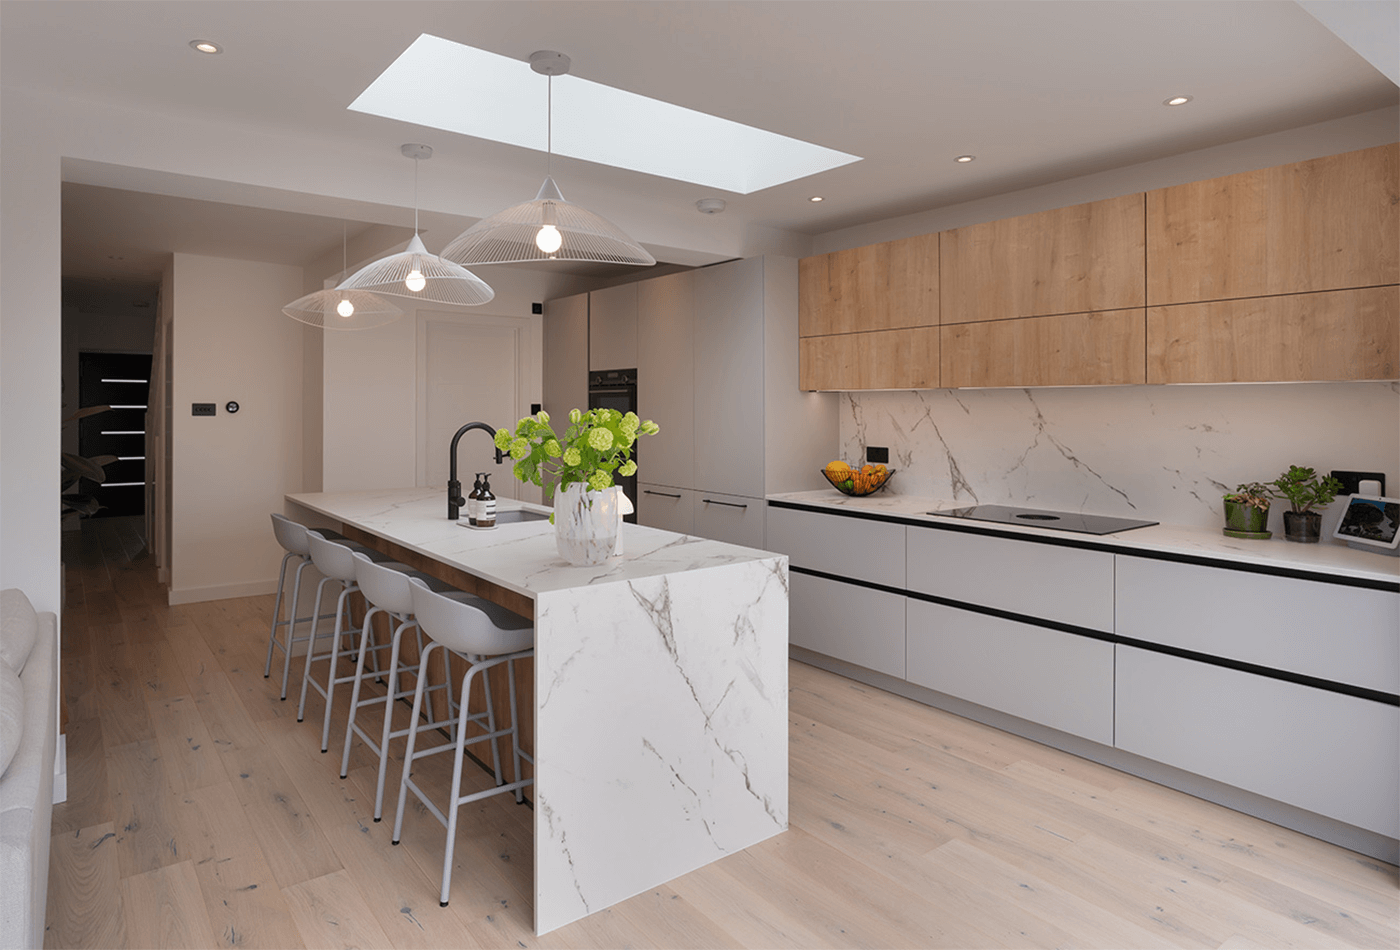 Let's see the benefits of having White Dekton Stone at Home